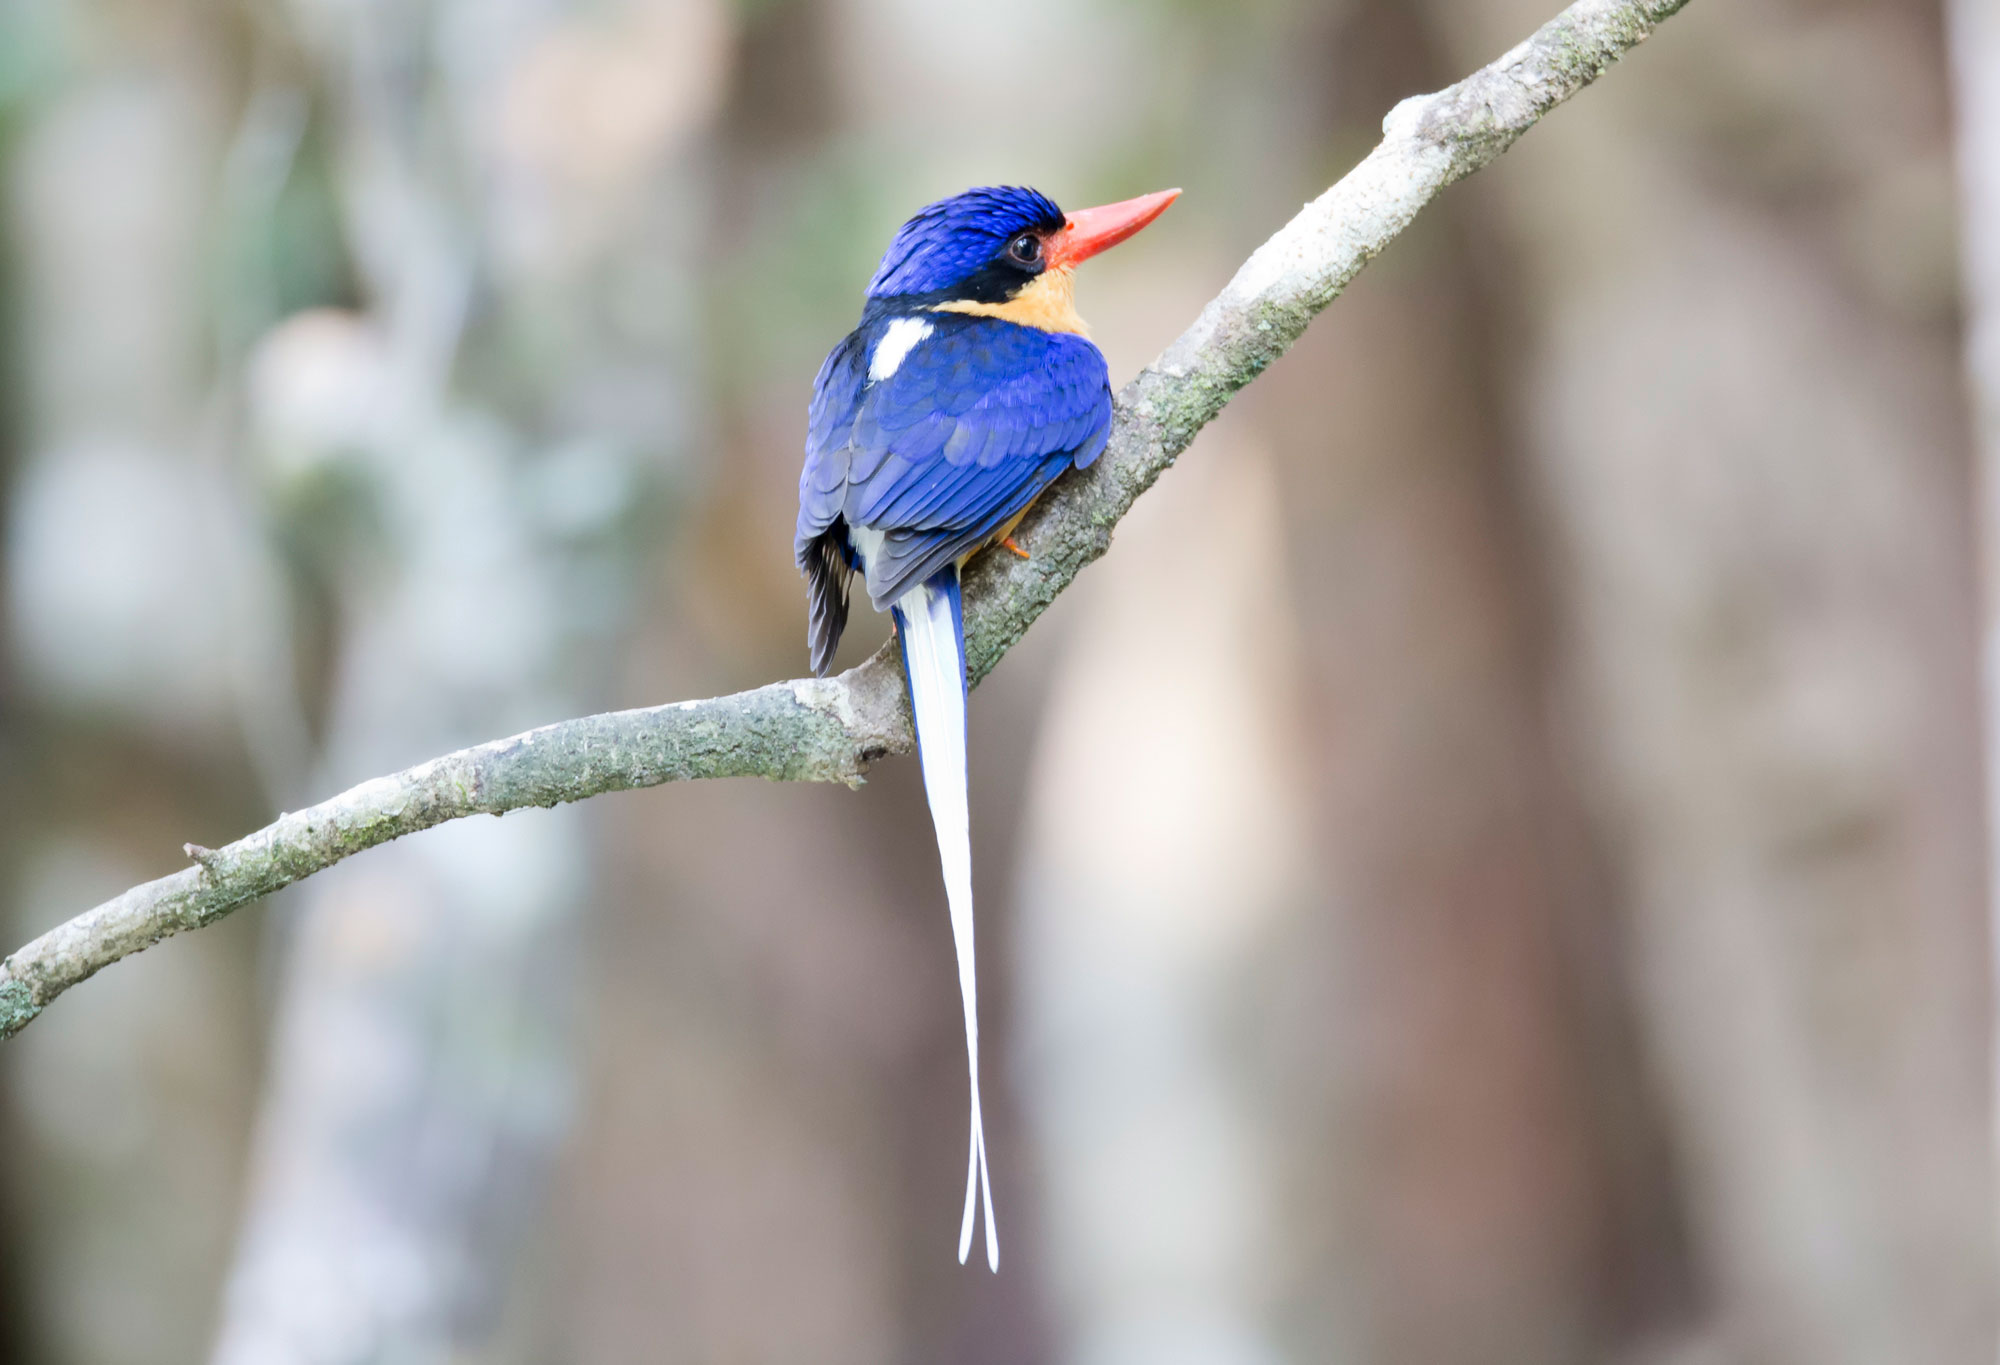 Photograph of a buff-breasted paradise-kingfisher sitting on a branch. The photo shows the bird from the back and side. Its wings and the top of its head are blue, it has a black stripe over its eye, a yellow throat, and a long white tail. Its beak is orange.